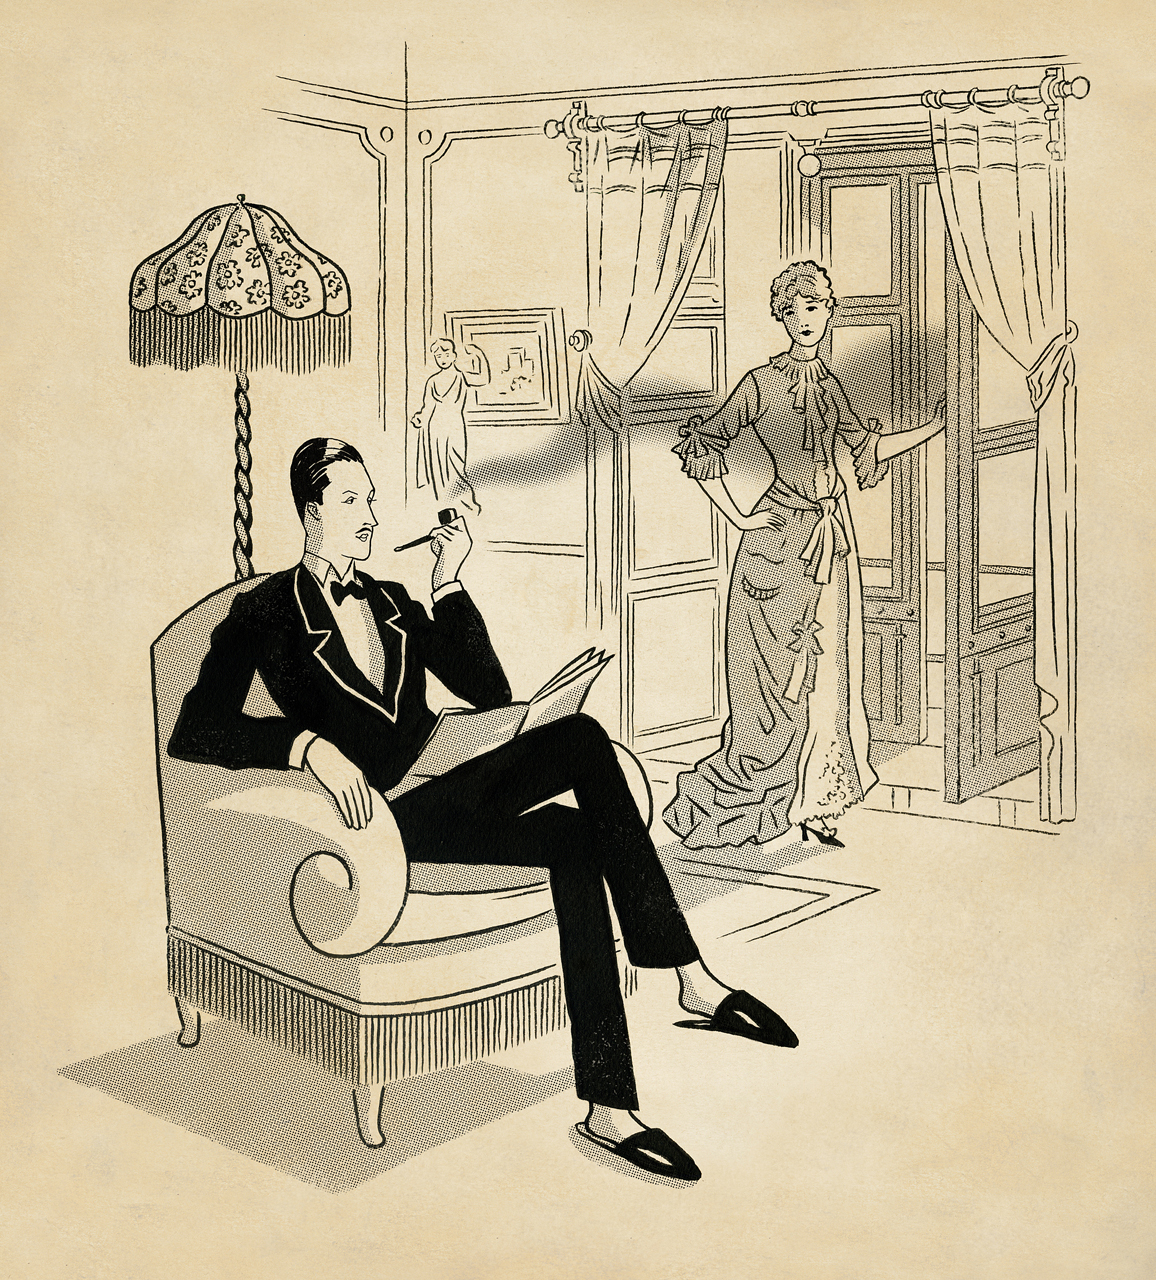 Illustration for an advertice campaign livingroom